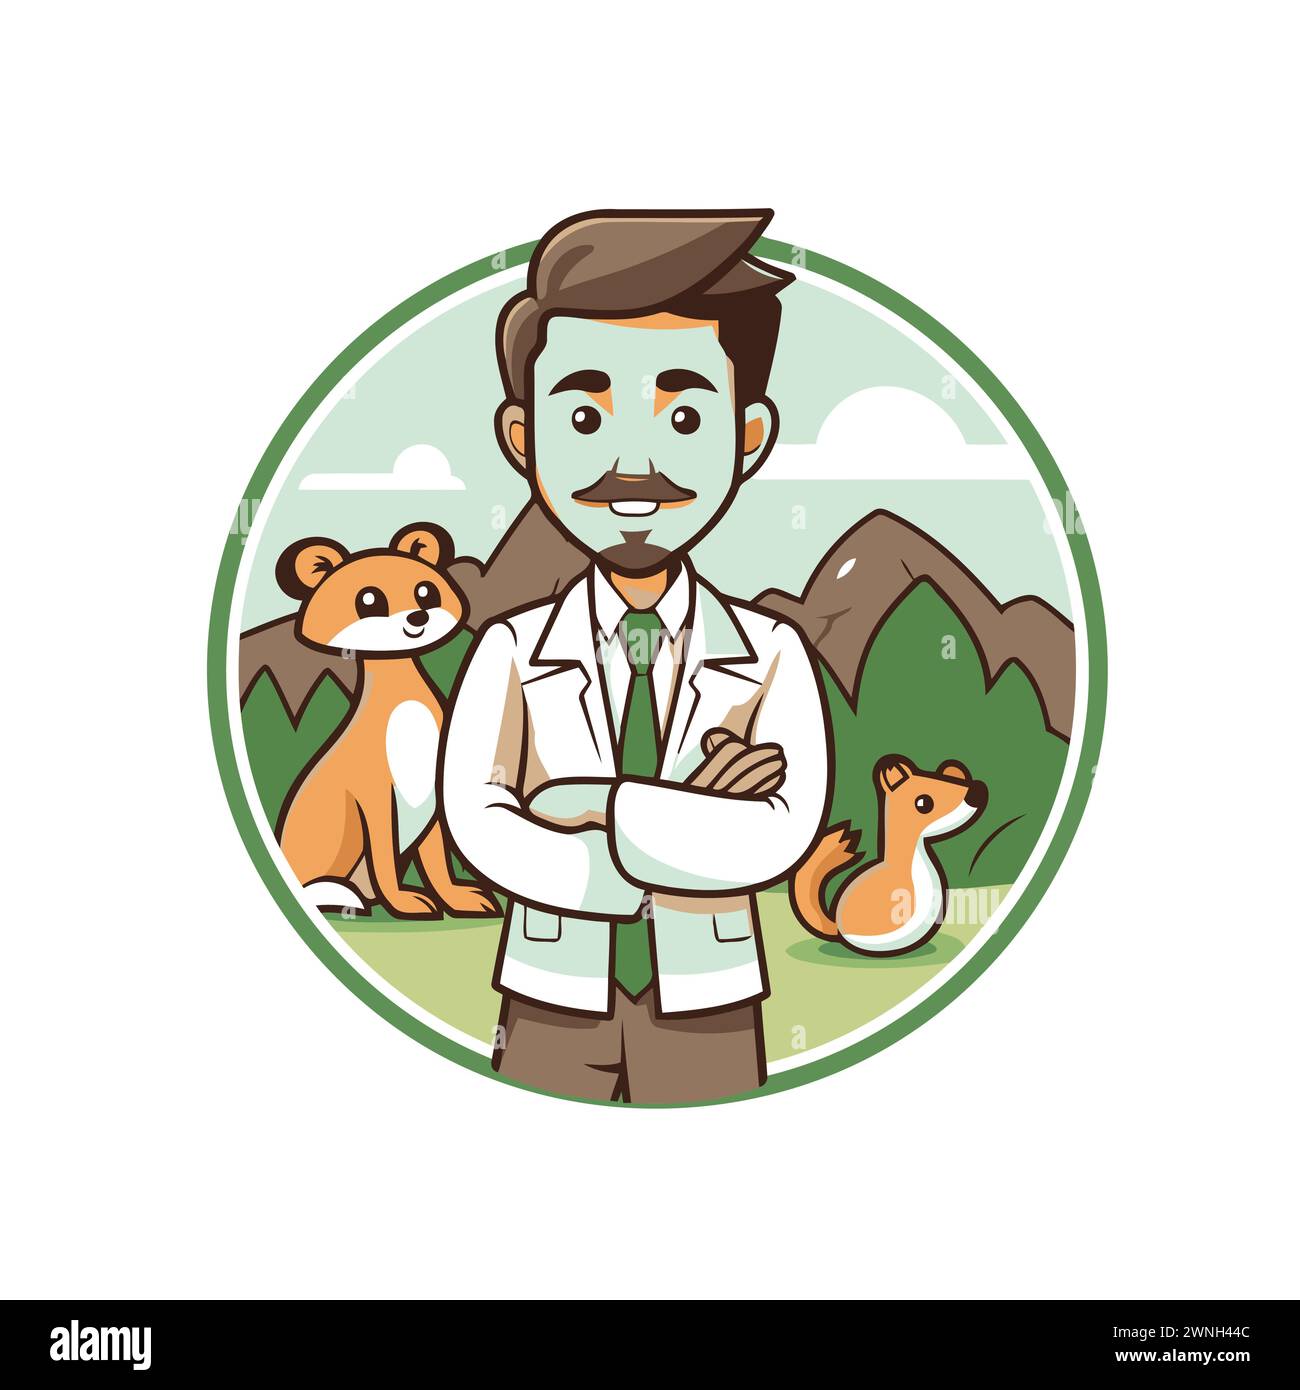 Vector illustration of a veterinarian with animals in the background. Cartoon style. Stock Vector